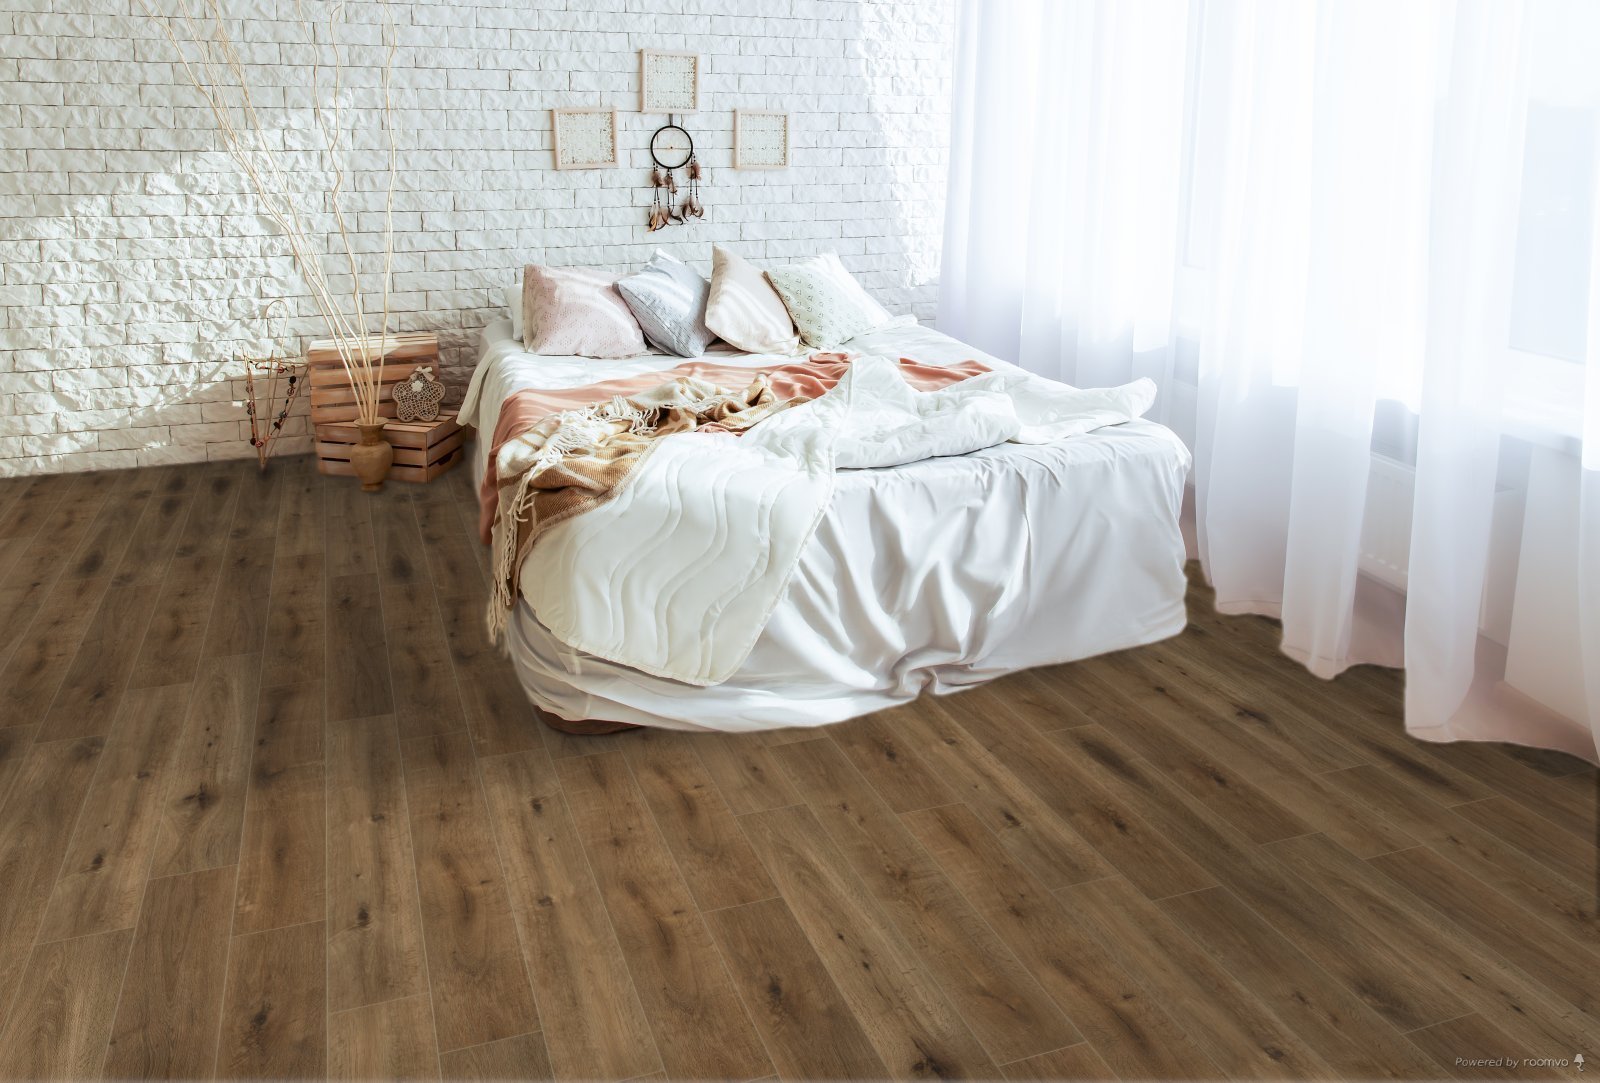 Horizen Flooring presents to you a picture of a quality wide plank Caliente luxury vinyl plank. NovoCore Q Merengue collection features a wide range of colors & designs that will compliment any interior. Natural wood grain synchronized surface allow for an authentic hardwood look & feel. This collection features a 0.3″ / 7.5 mm overall thickness and a durable 22 mil / 0.55 mm wear layer for residential and commercial applications.